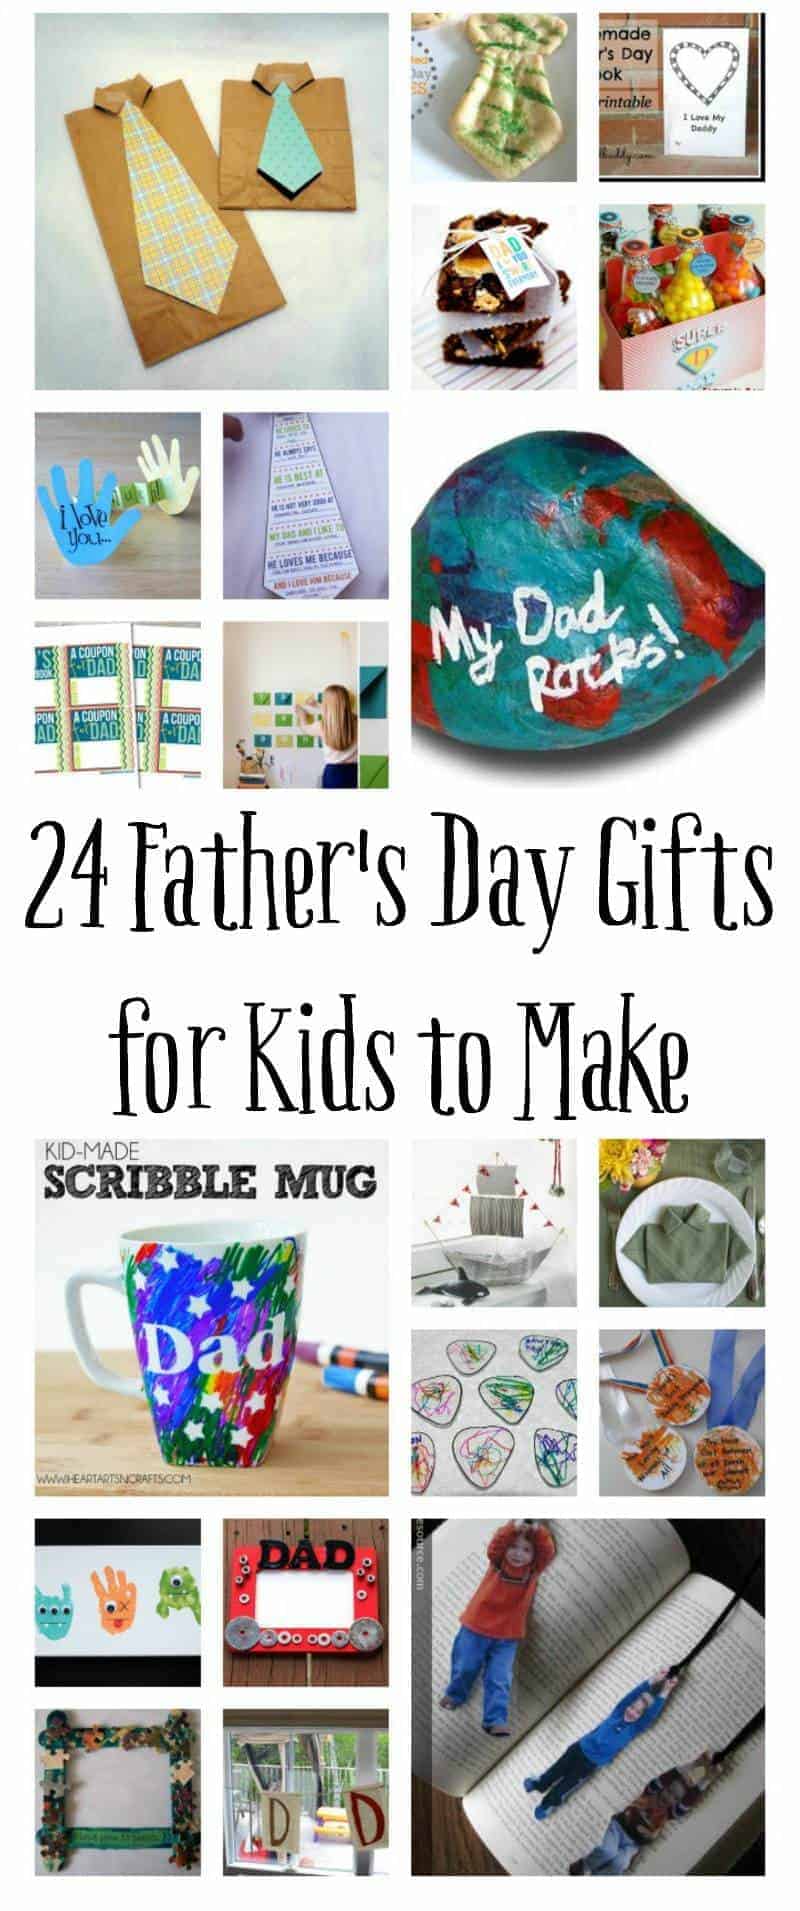 Homemade Father's Day Gifts for Kids to Make